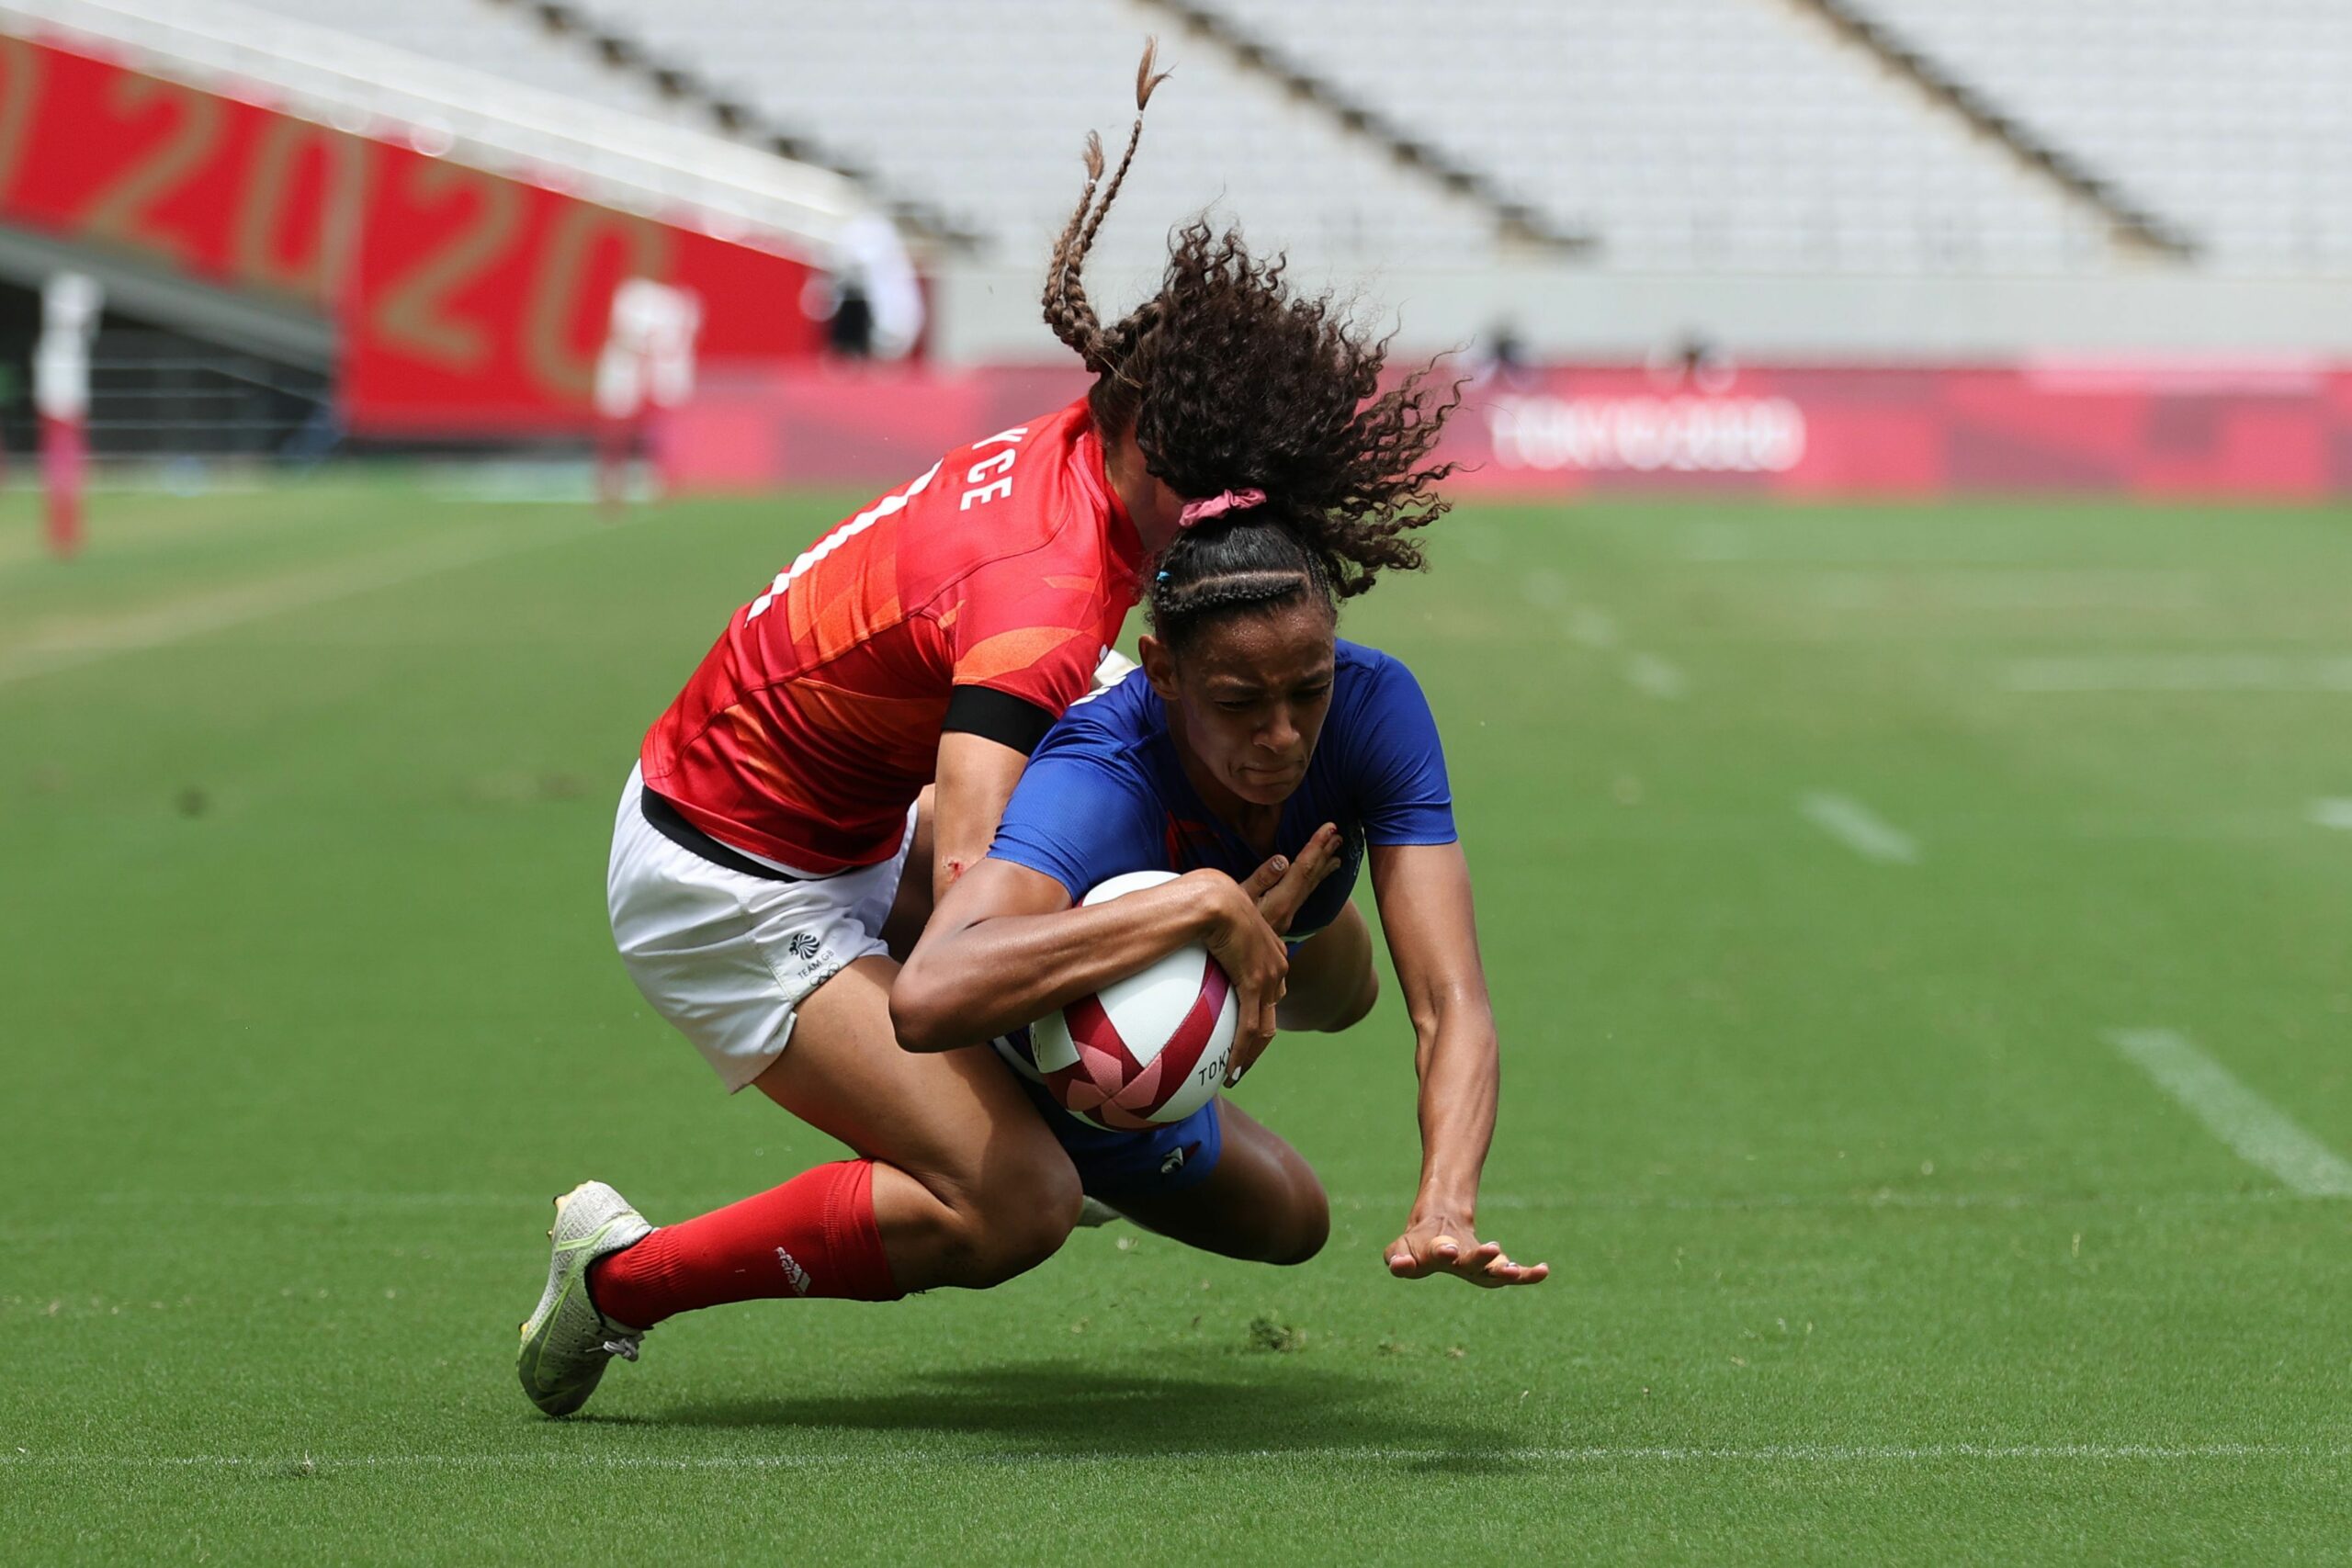 Frances anne cecile ciofani dives in for a try against team gb in the medal semi final on day three of the tokyo 2020 olympic games scaled